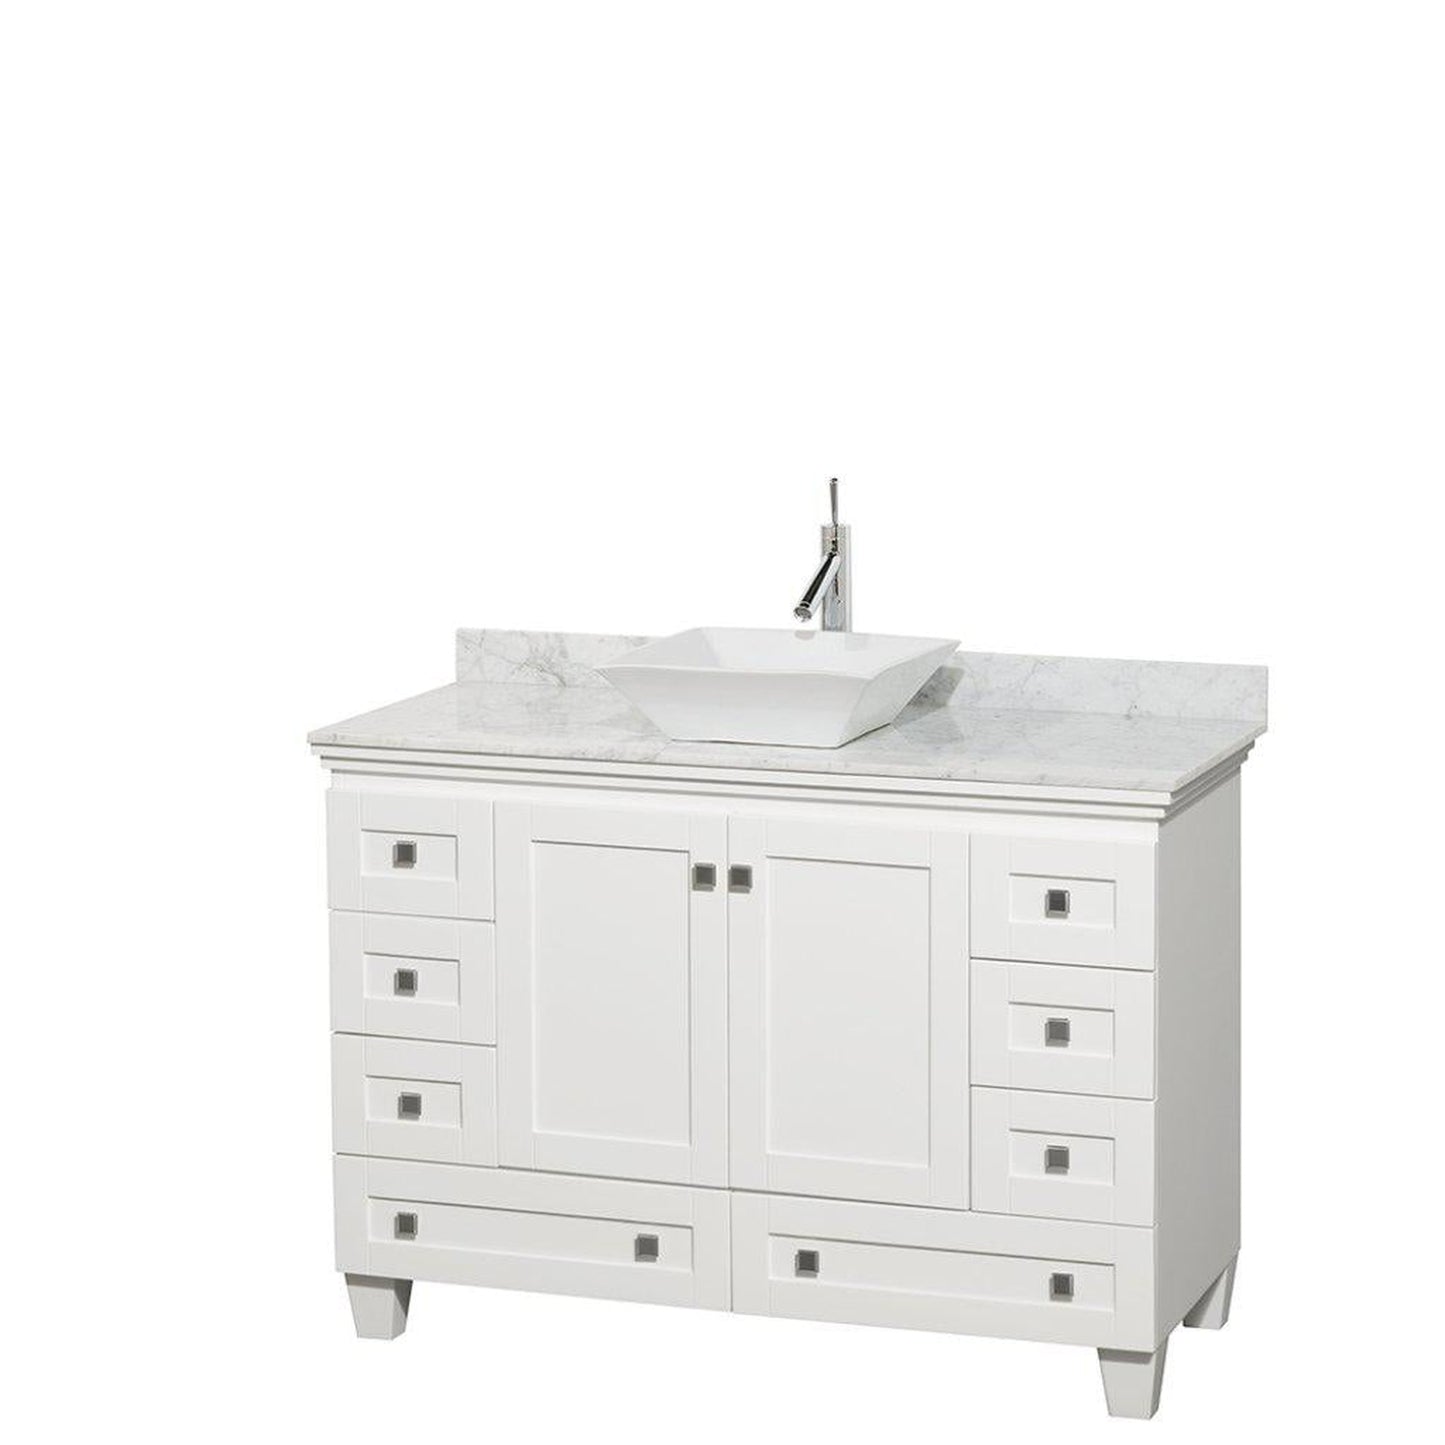 Wyndham Collection Acclaim 48" Single Bathroom White Vanity With White Carrara Marble Countertop And Pyra White Sink